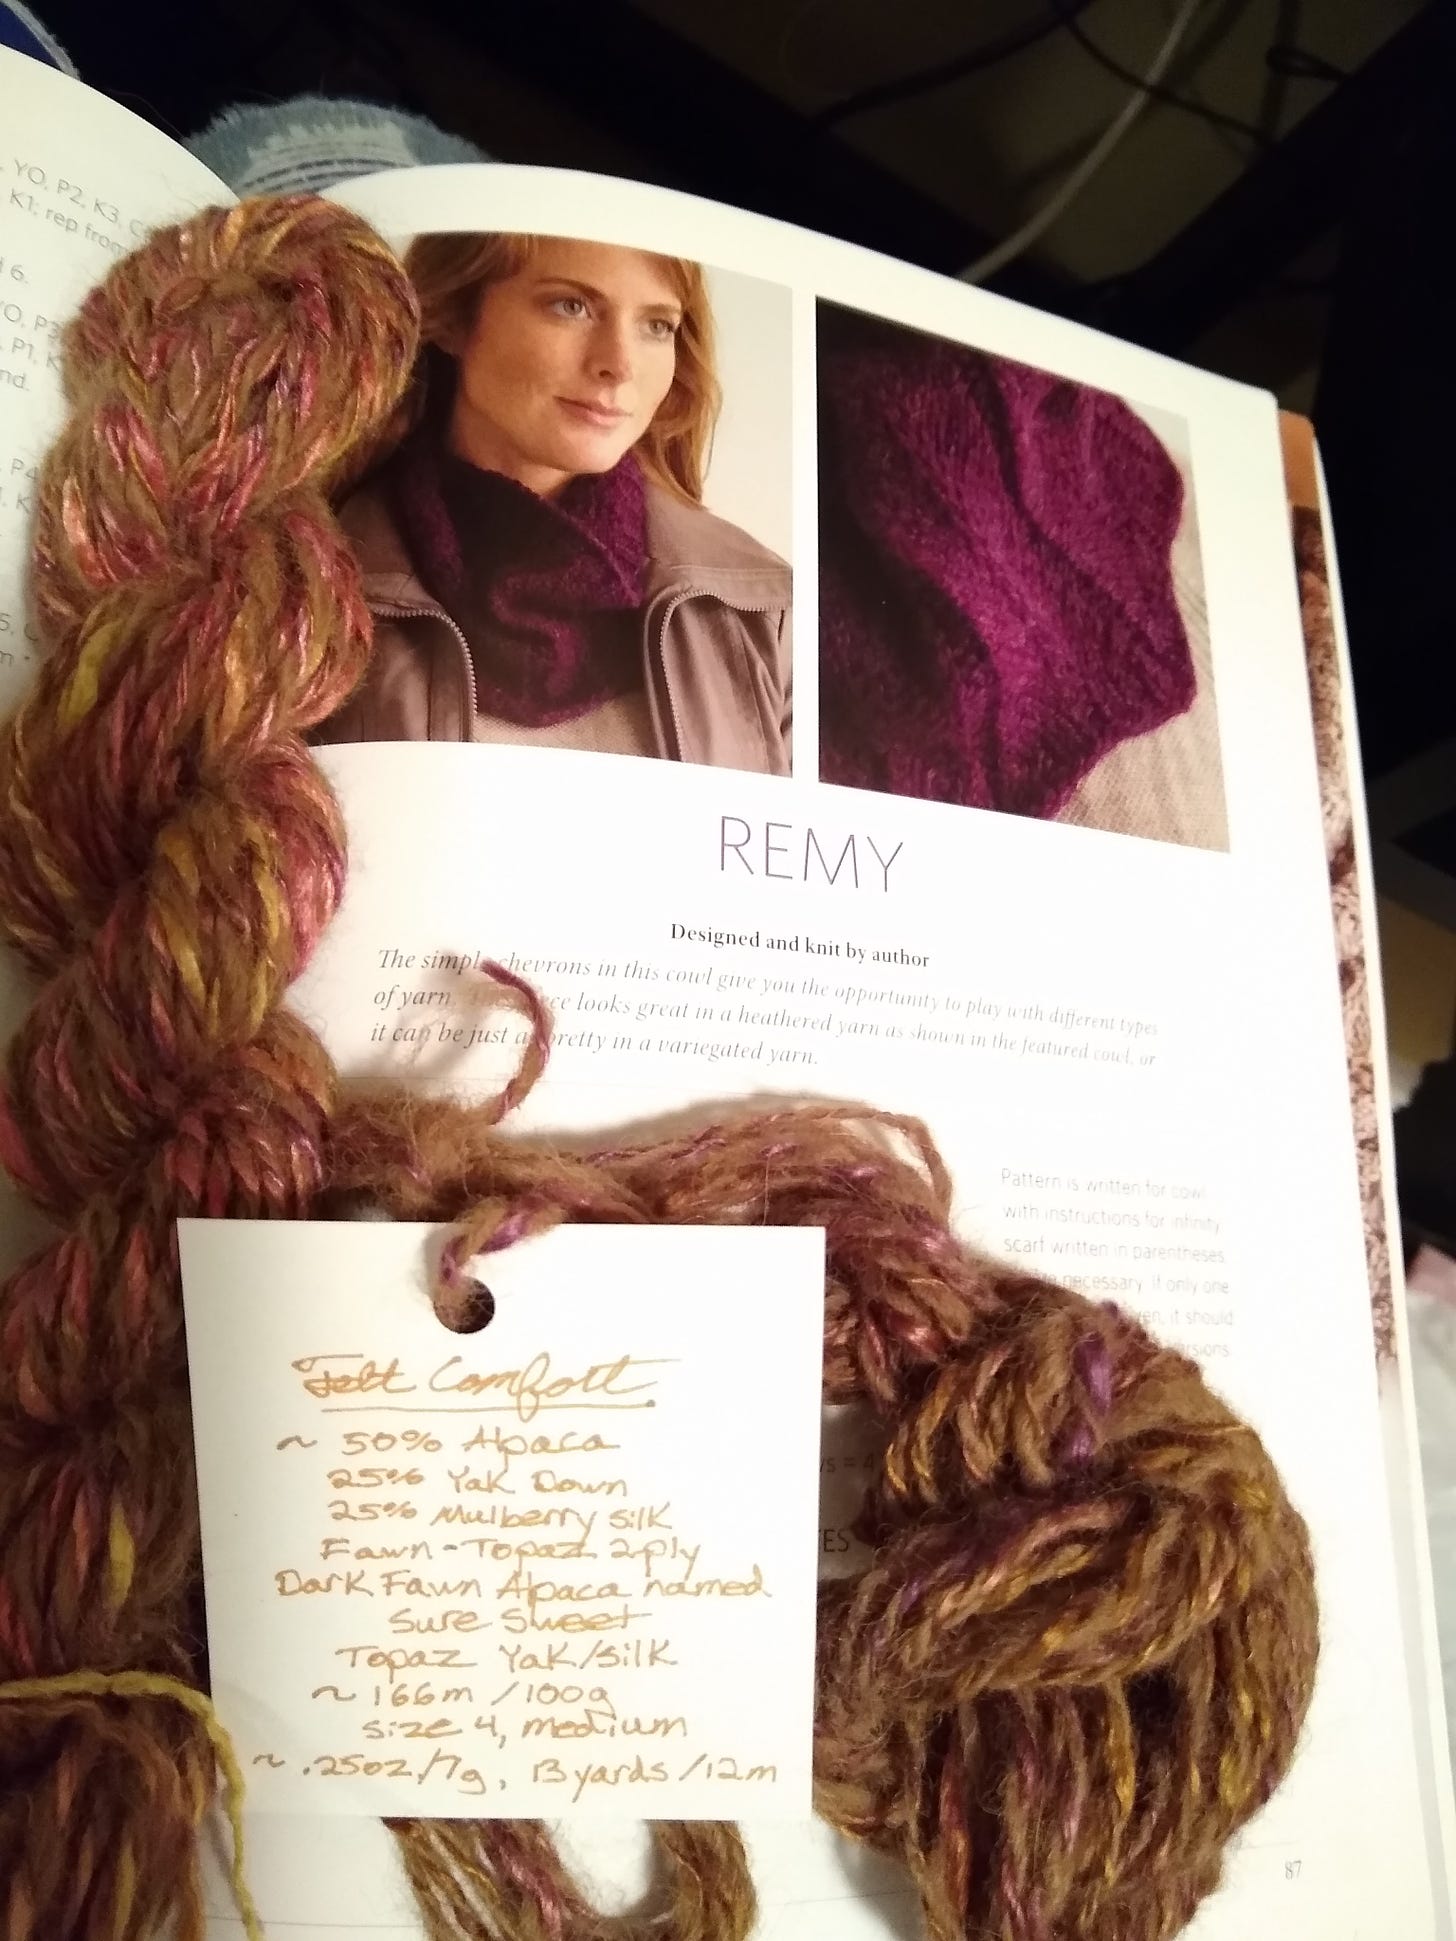 Two mini-skeins on an open knitting book, and one handwritten yarn label.